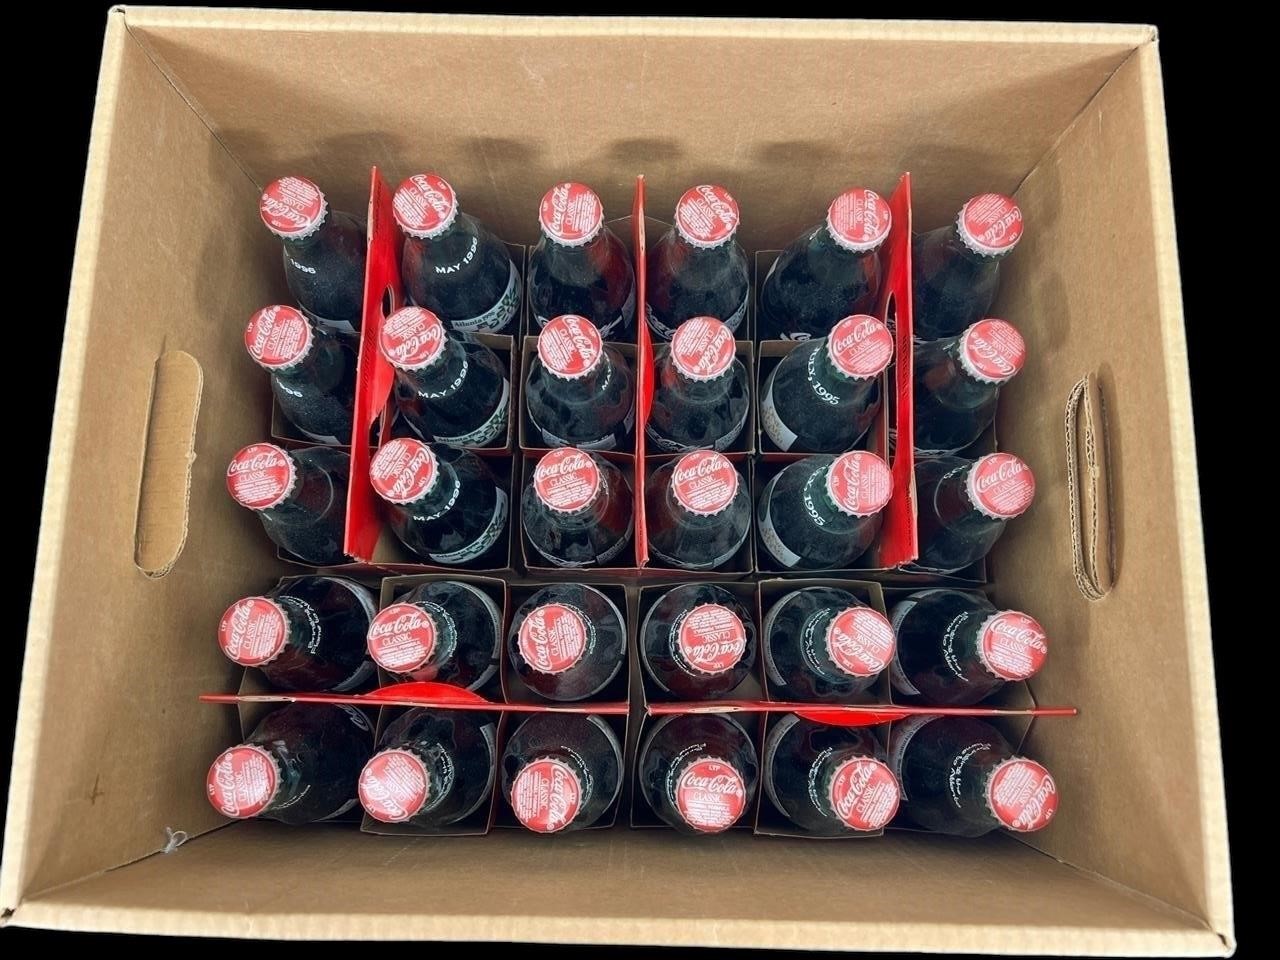 Collectible Coca-Cola bottles - 1990s and 2000s